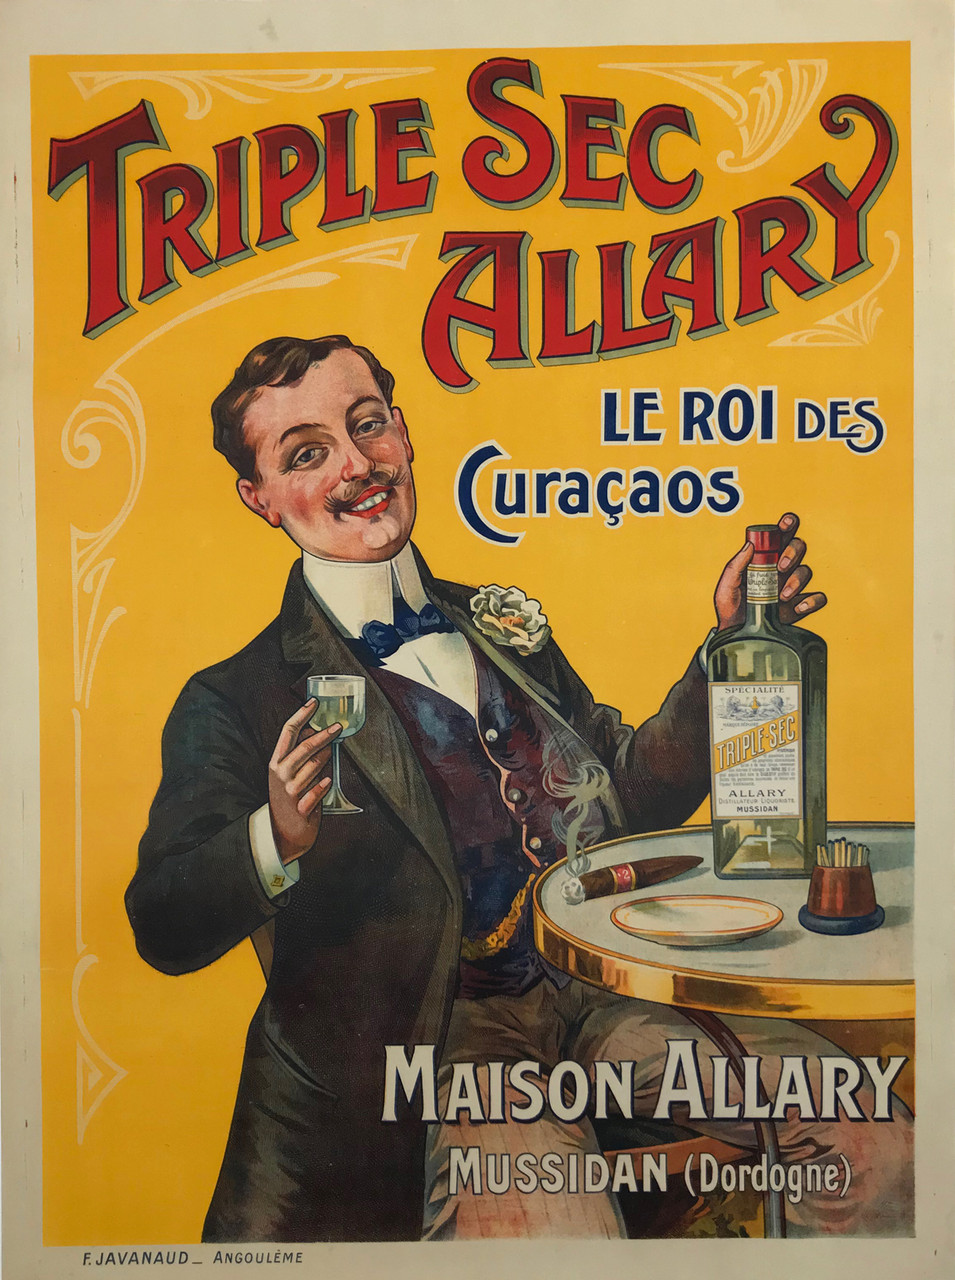 Triple Sec Allary Le Roi Des Curacaos Original 1900 Vintage French Liquer Advertisement Poster By Imp. Javanaud Linen Backed.